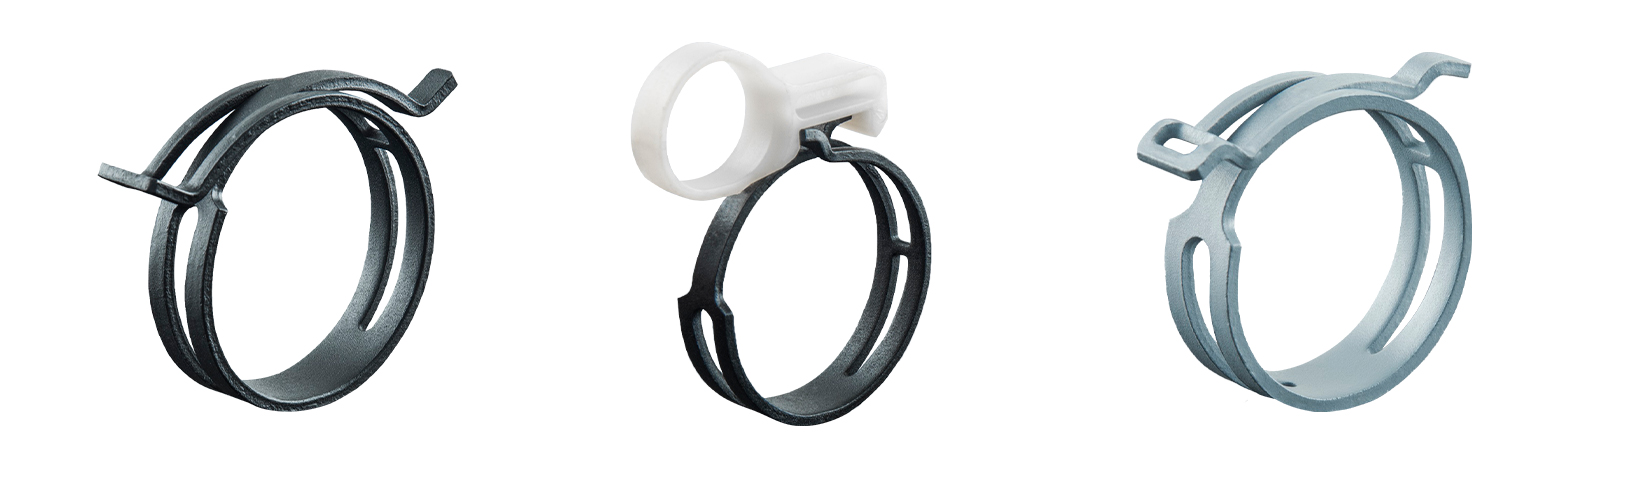 Spring-loaded hose clamps